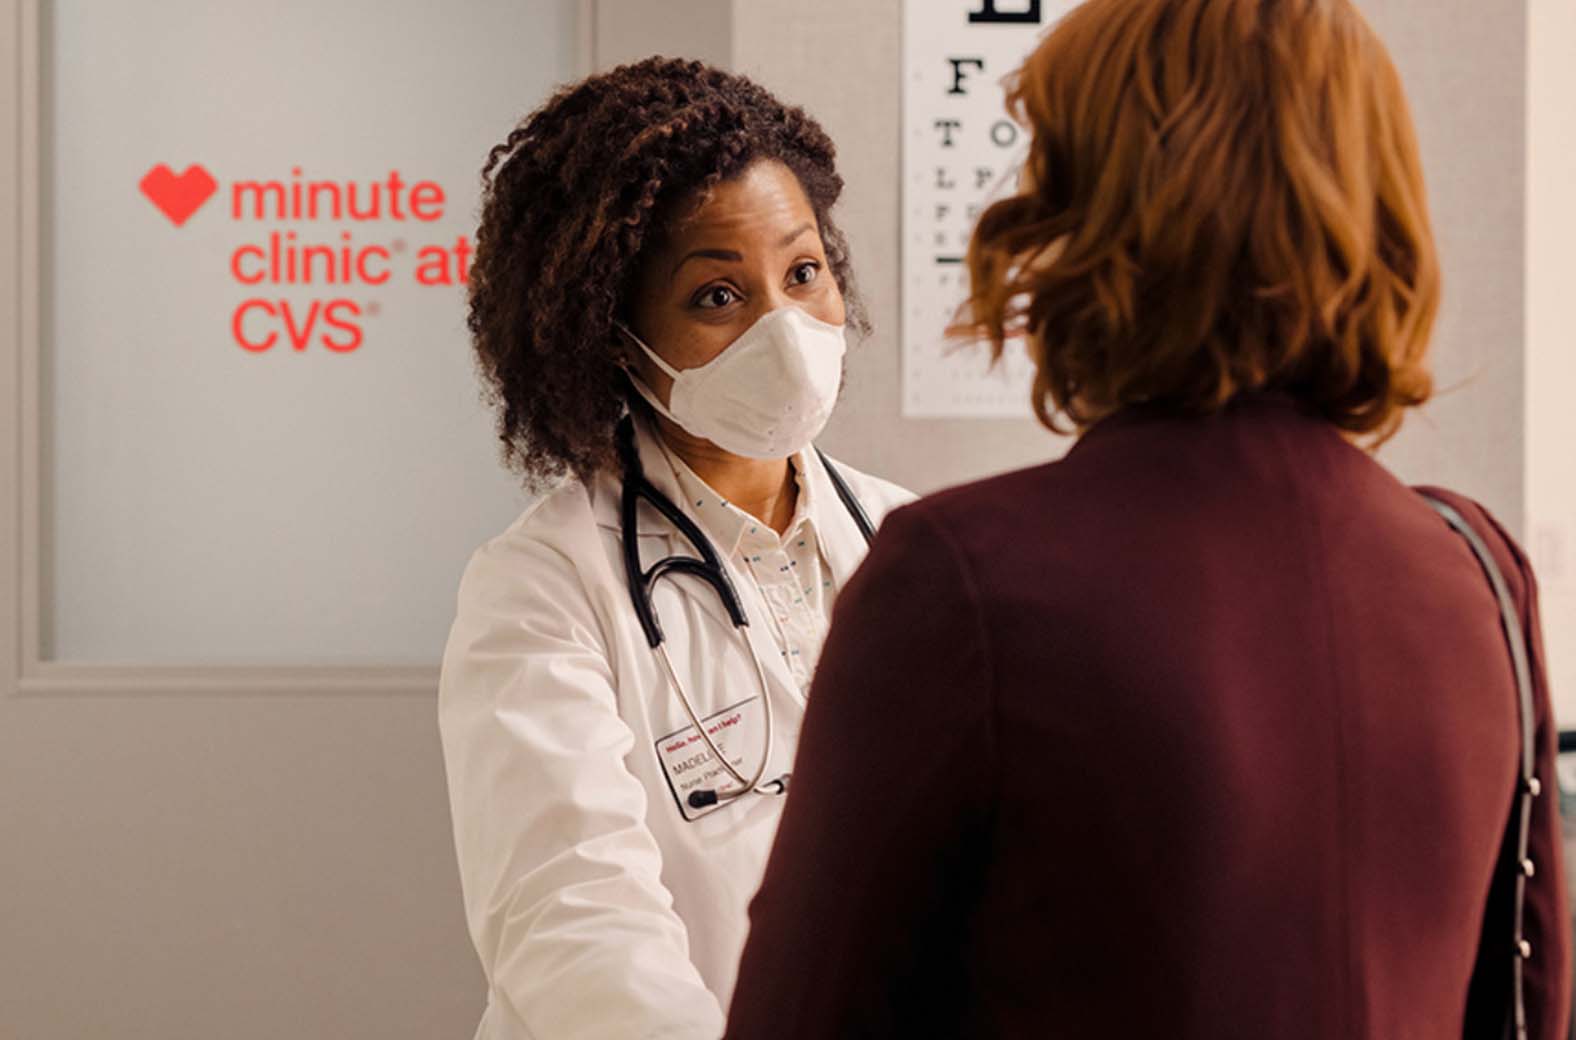 Minute Clinic at CVS health care provider with a patient